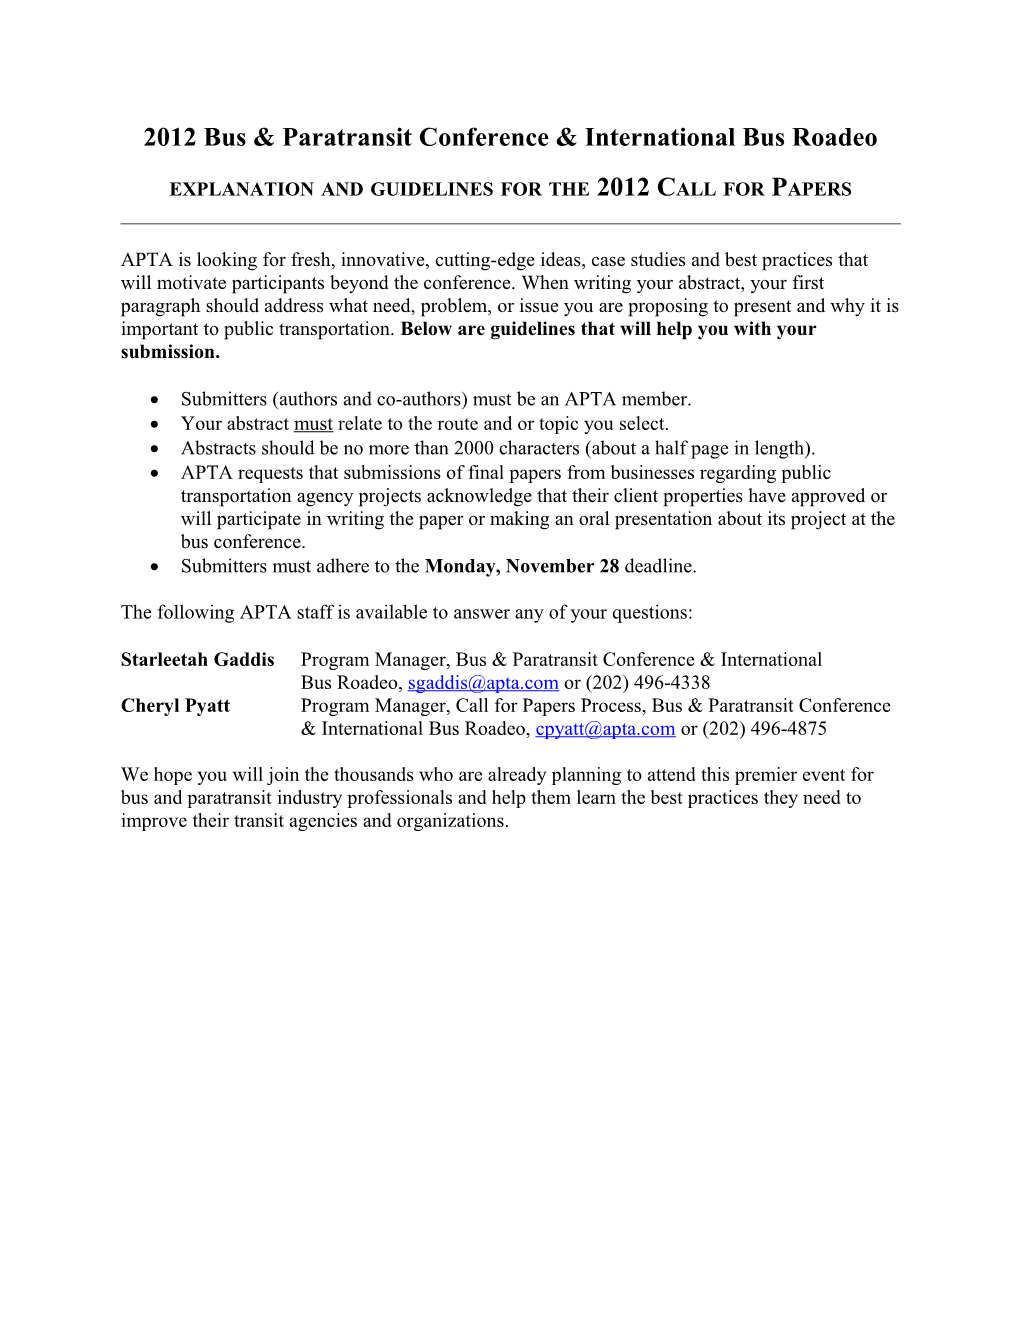 Bus and Paratransit Conference Planning Committee - 2012 Call for Papers and Session List